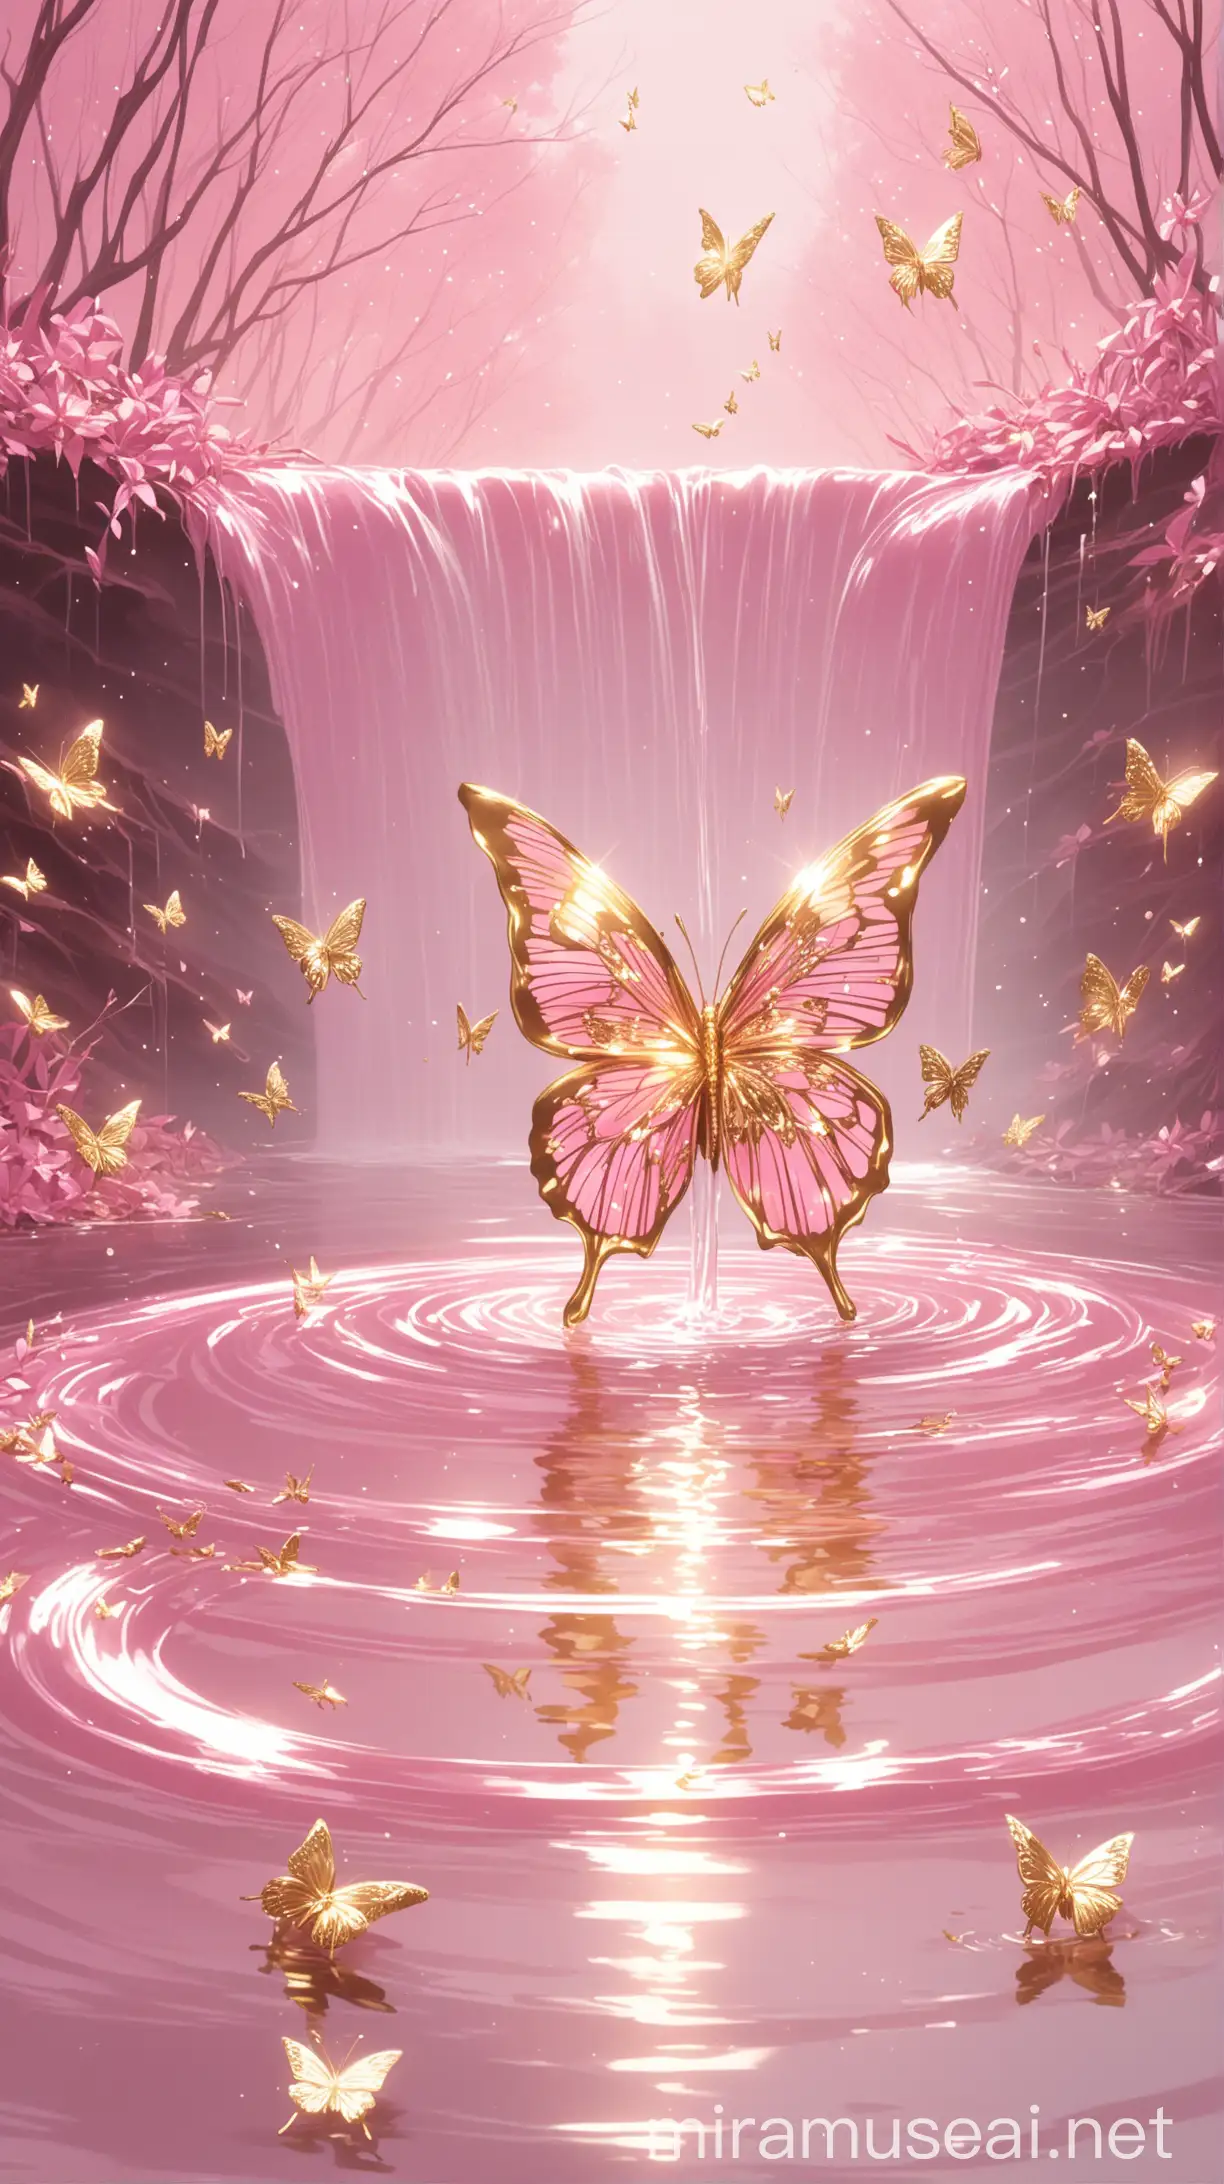 Tranquil Stream Water Reflecting Golden Butterfly in Pink Aesthetic